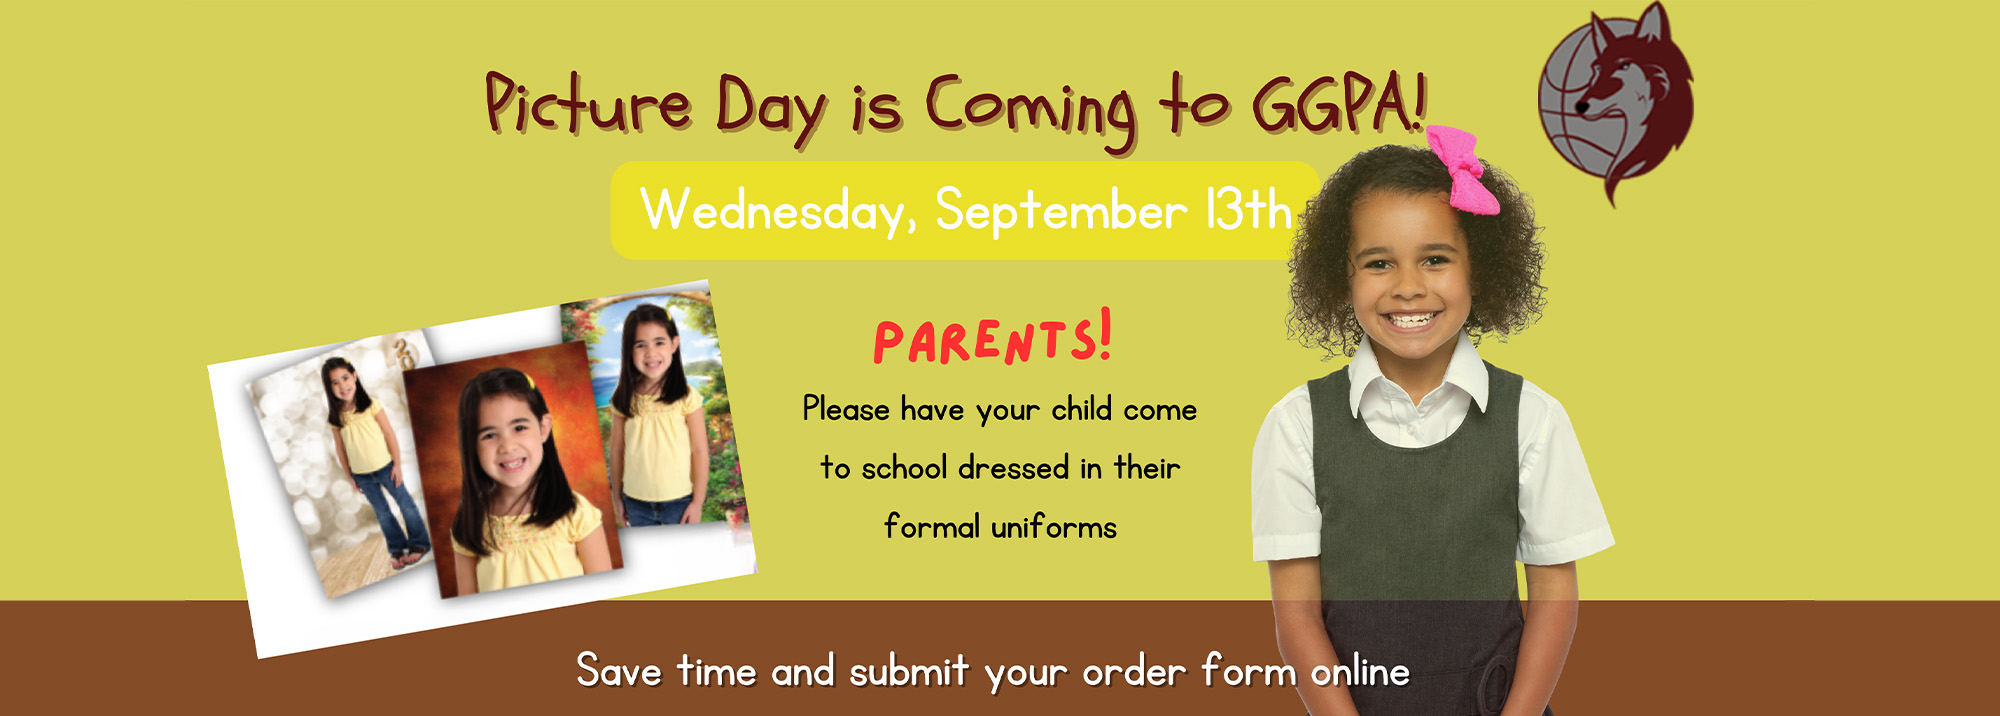 Picture Day is Coming to GGPA! Wednesday, September 13th PARENTS! Please have your child come to school dressed in their formal uniforms Save time and submit your order form online